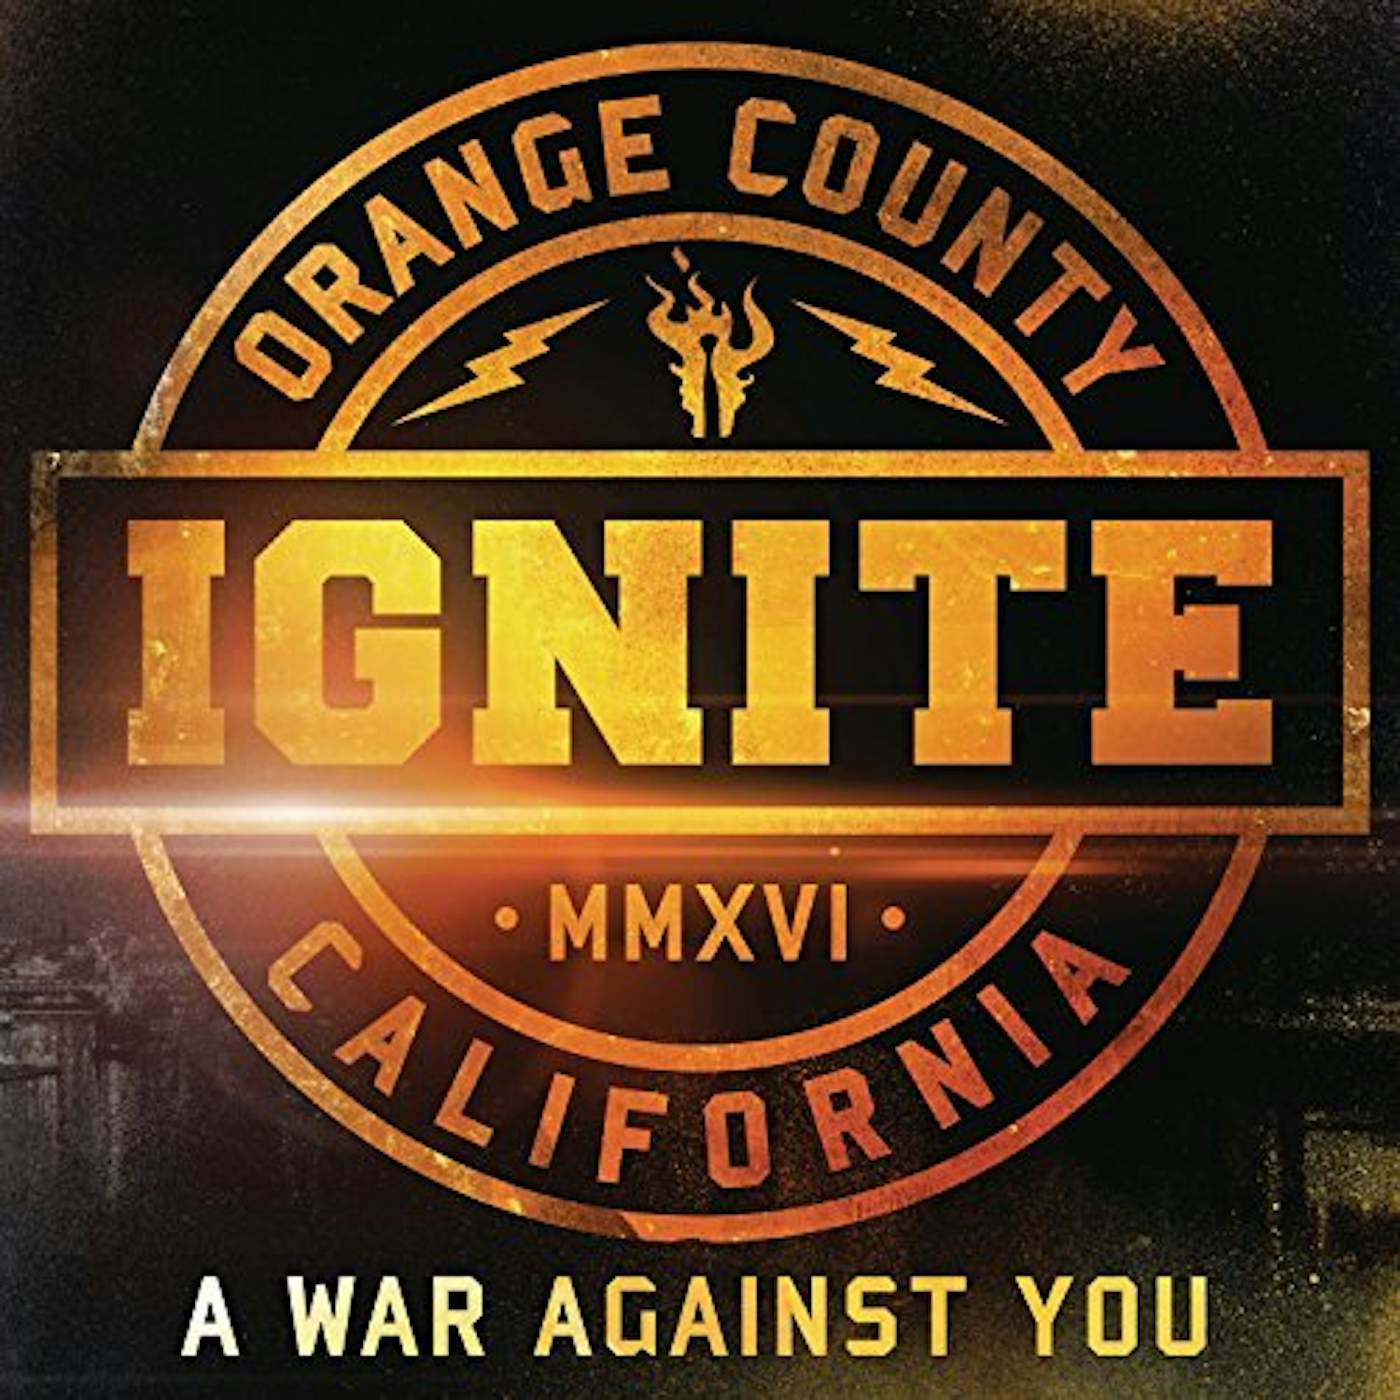 Ignite WAR AGAINST YOU: LIMITED EDITION CD